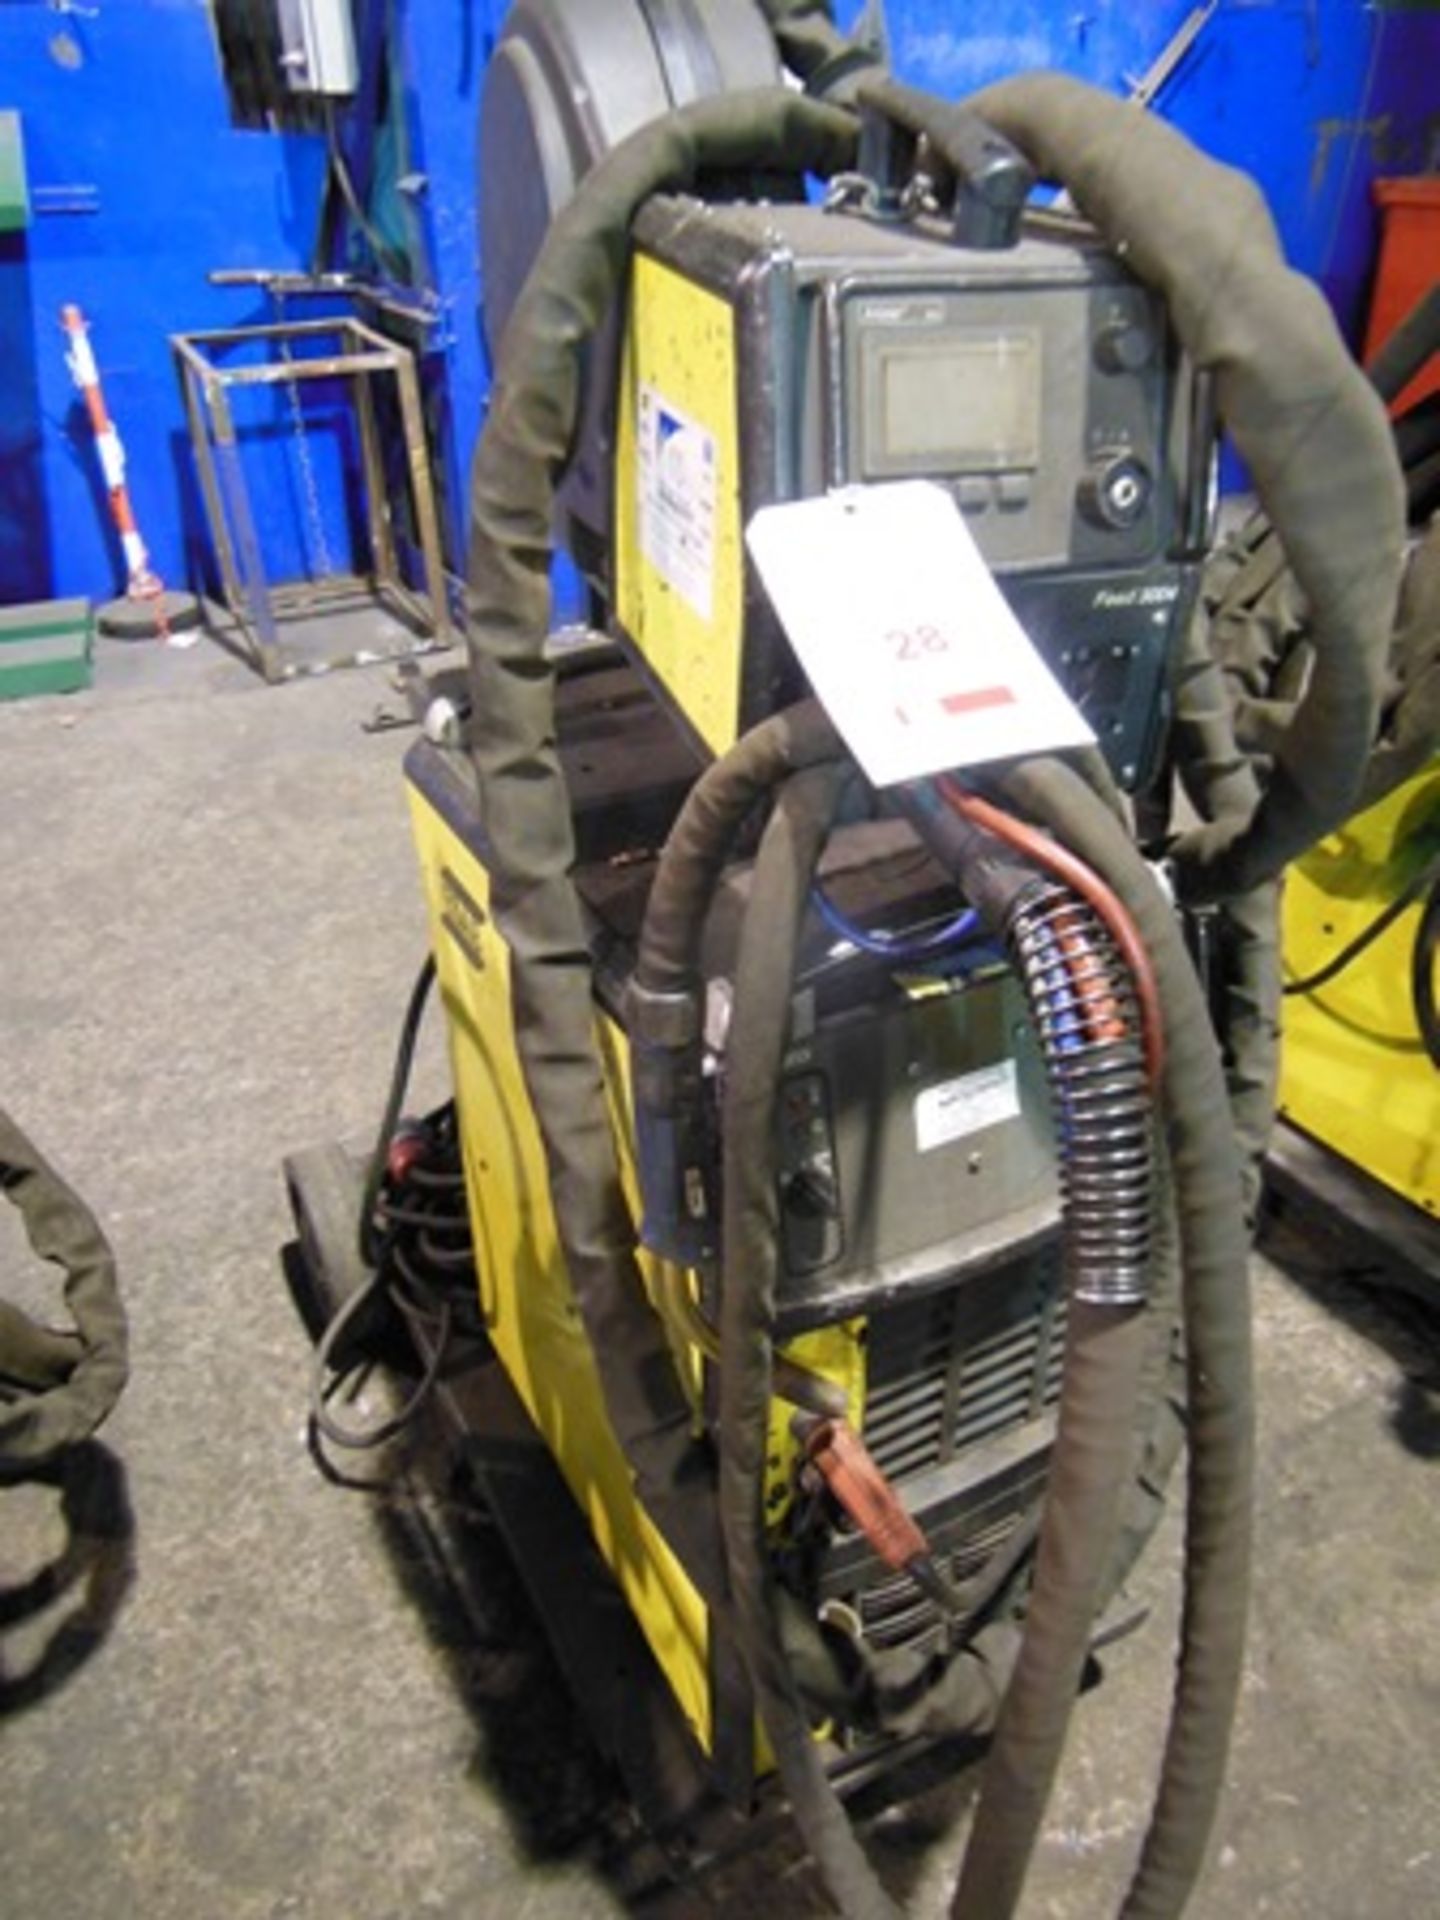 ESAB Mig 4000iw mig welding set Serial no. 640-802-3065 with Aristo Feed 3004 wire feed unit